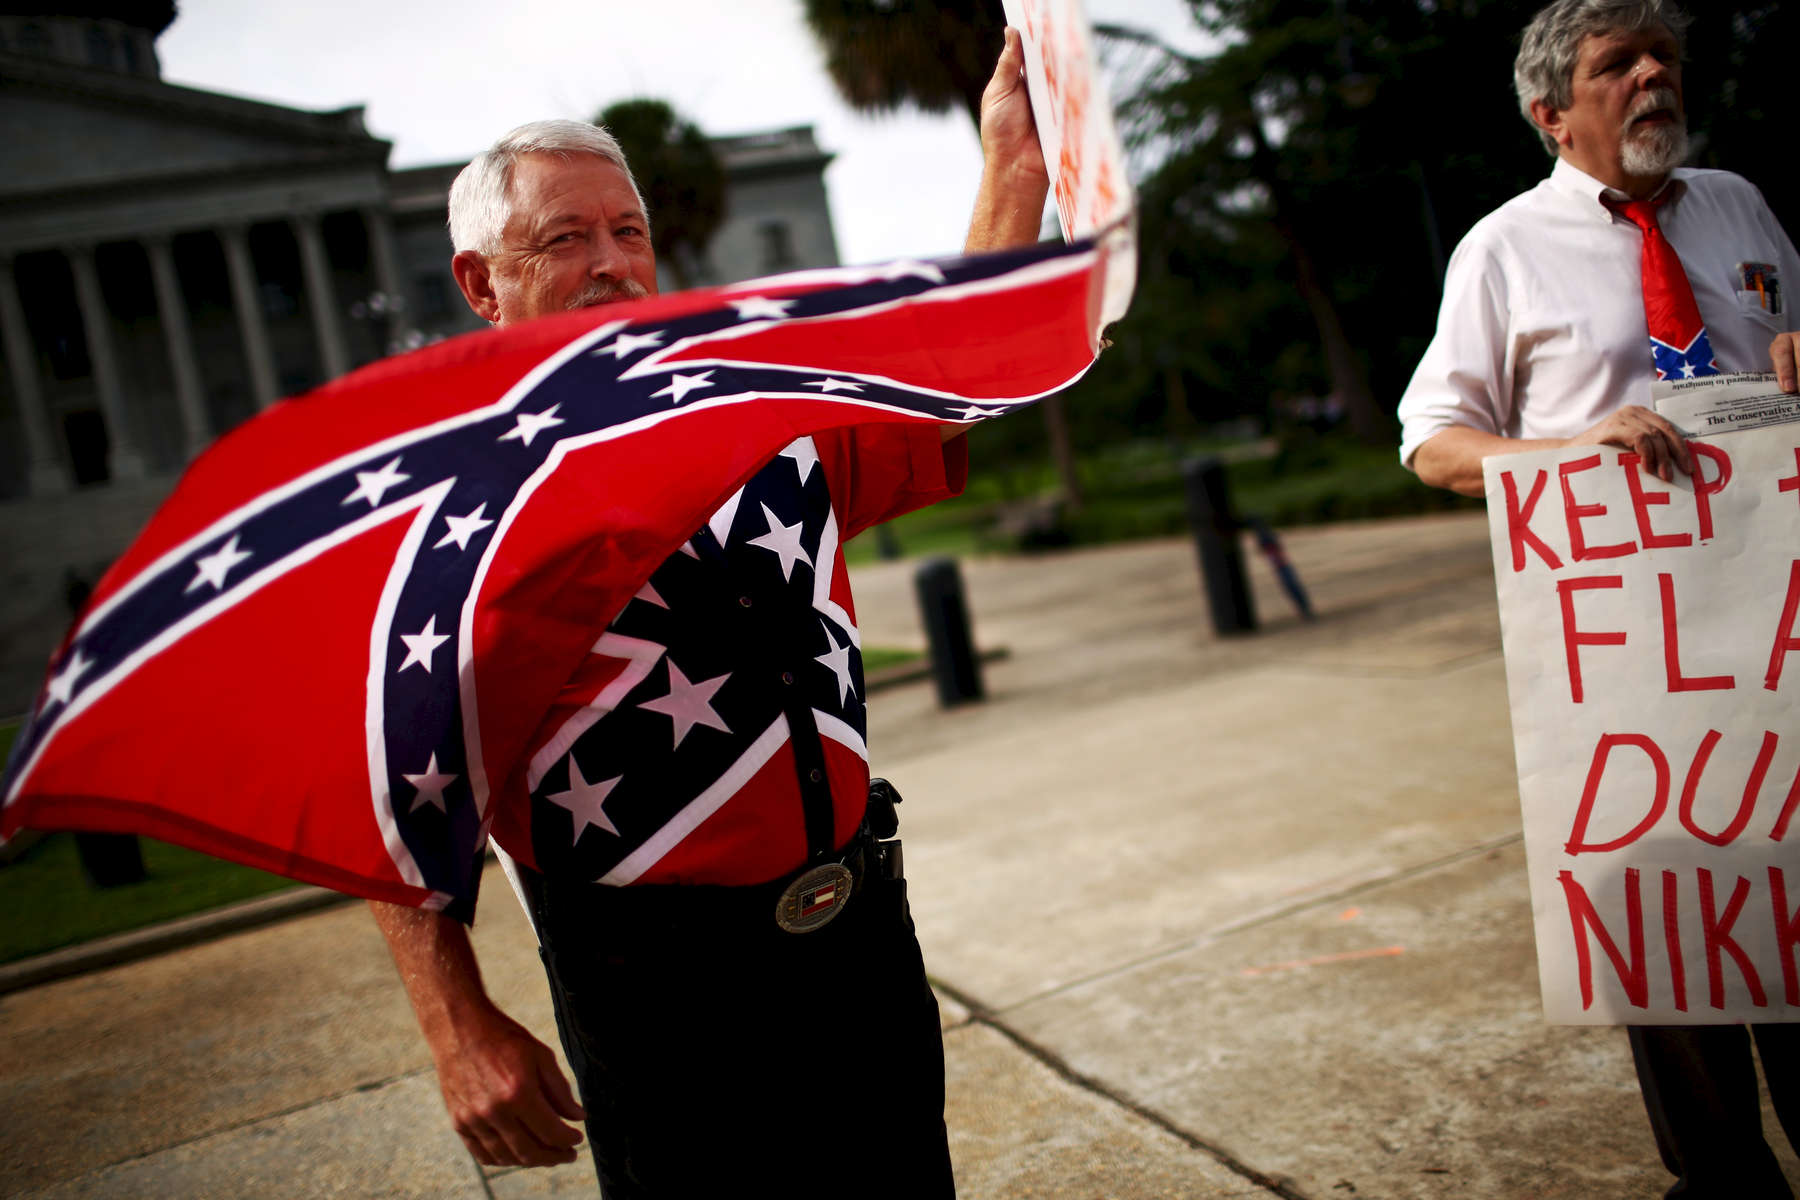 NAT ***Columbia, SC -- 07/06/2015 - Flag supporters outside the state house. South Carolina's legislature takes up the issue of removing the Confederate battle flag from the state house grounds on Monday.  (Travis Dove for The New York Times)